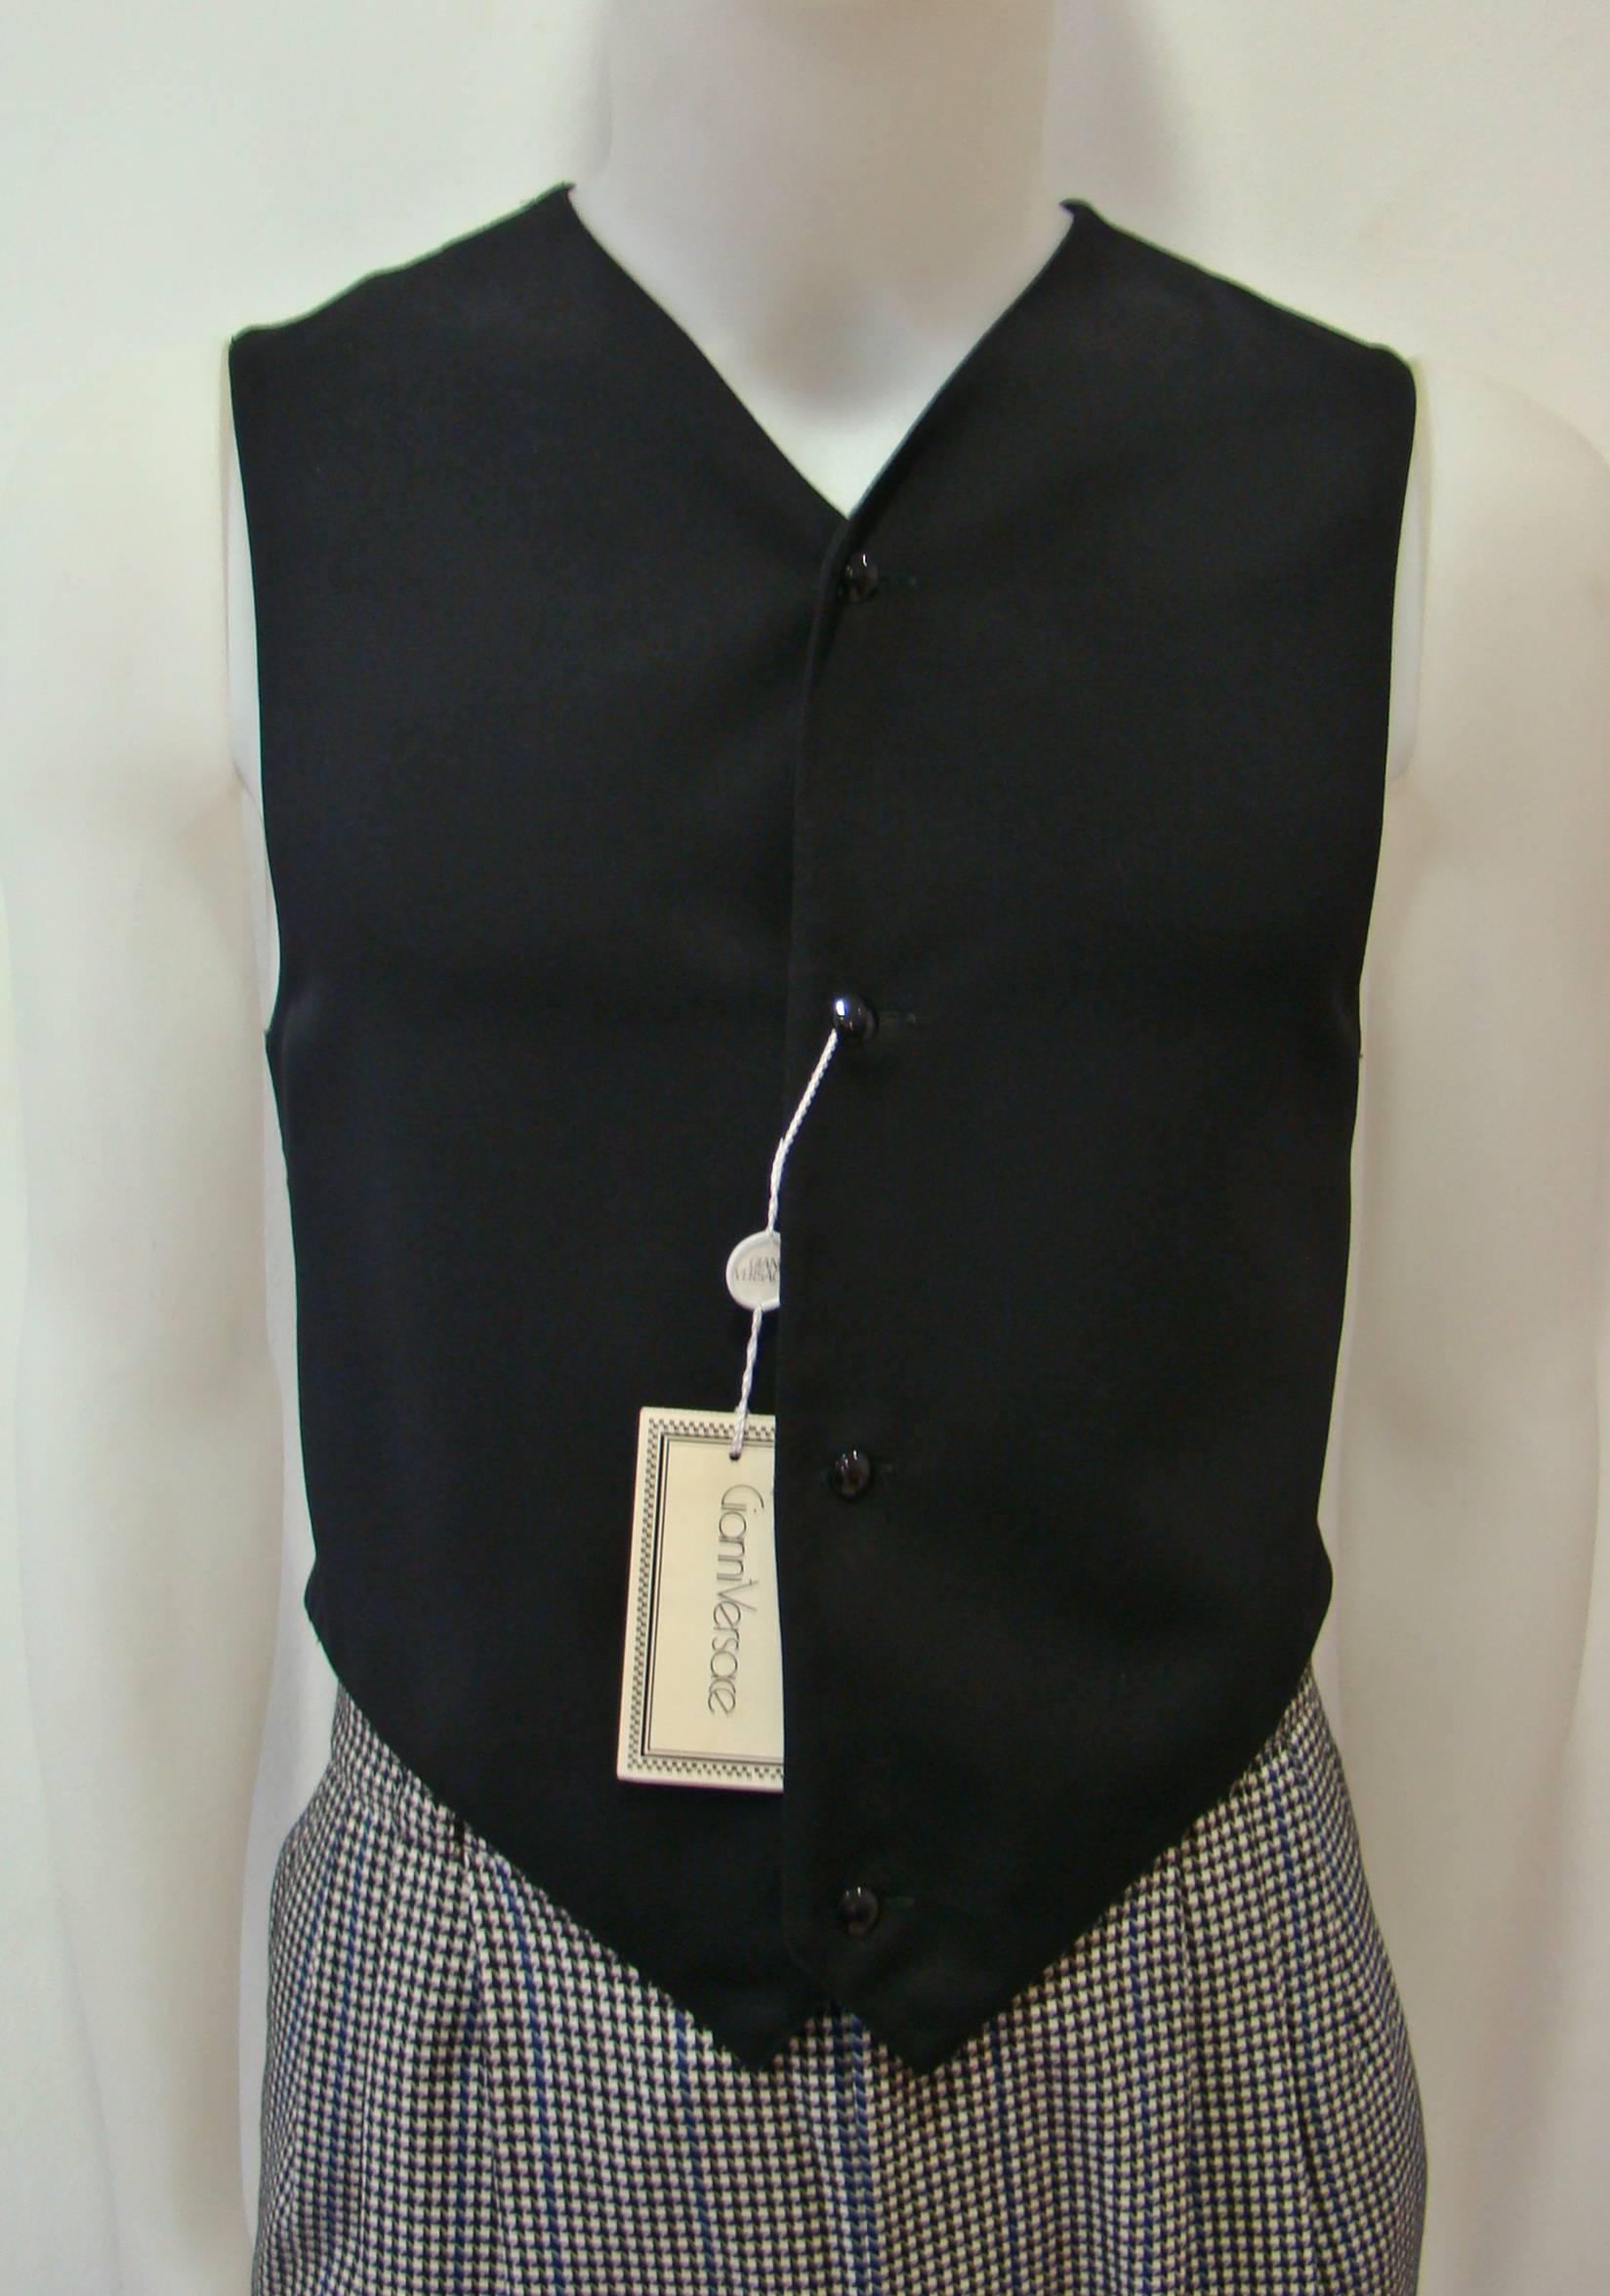 Gianni Versace Wool Waistcoat Vest Featuring A Black Front And A Navy Blue Back.